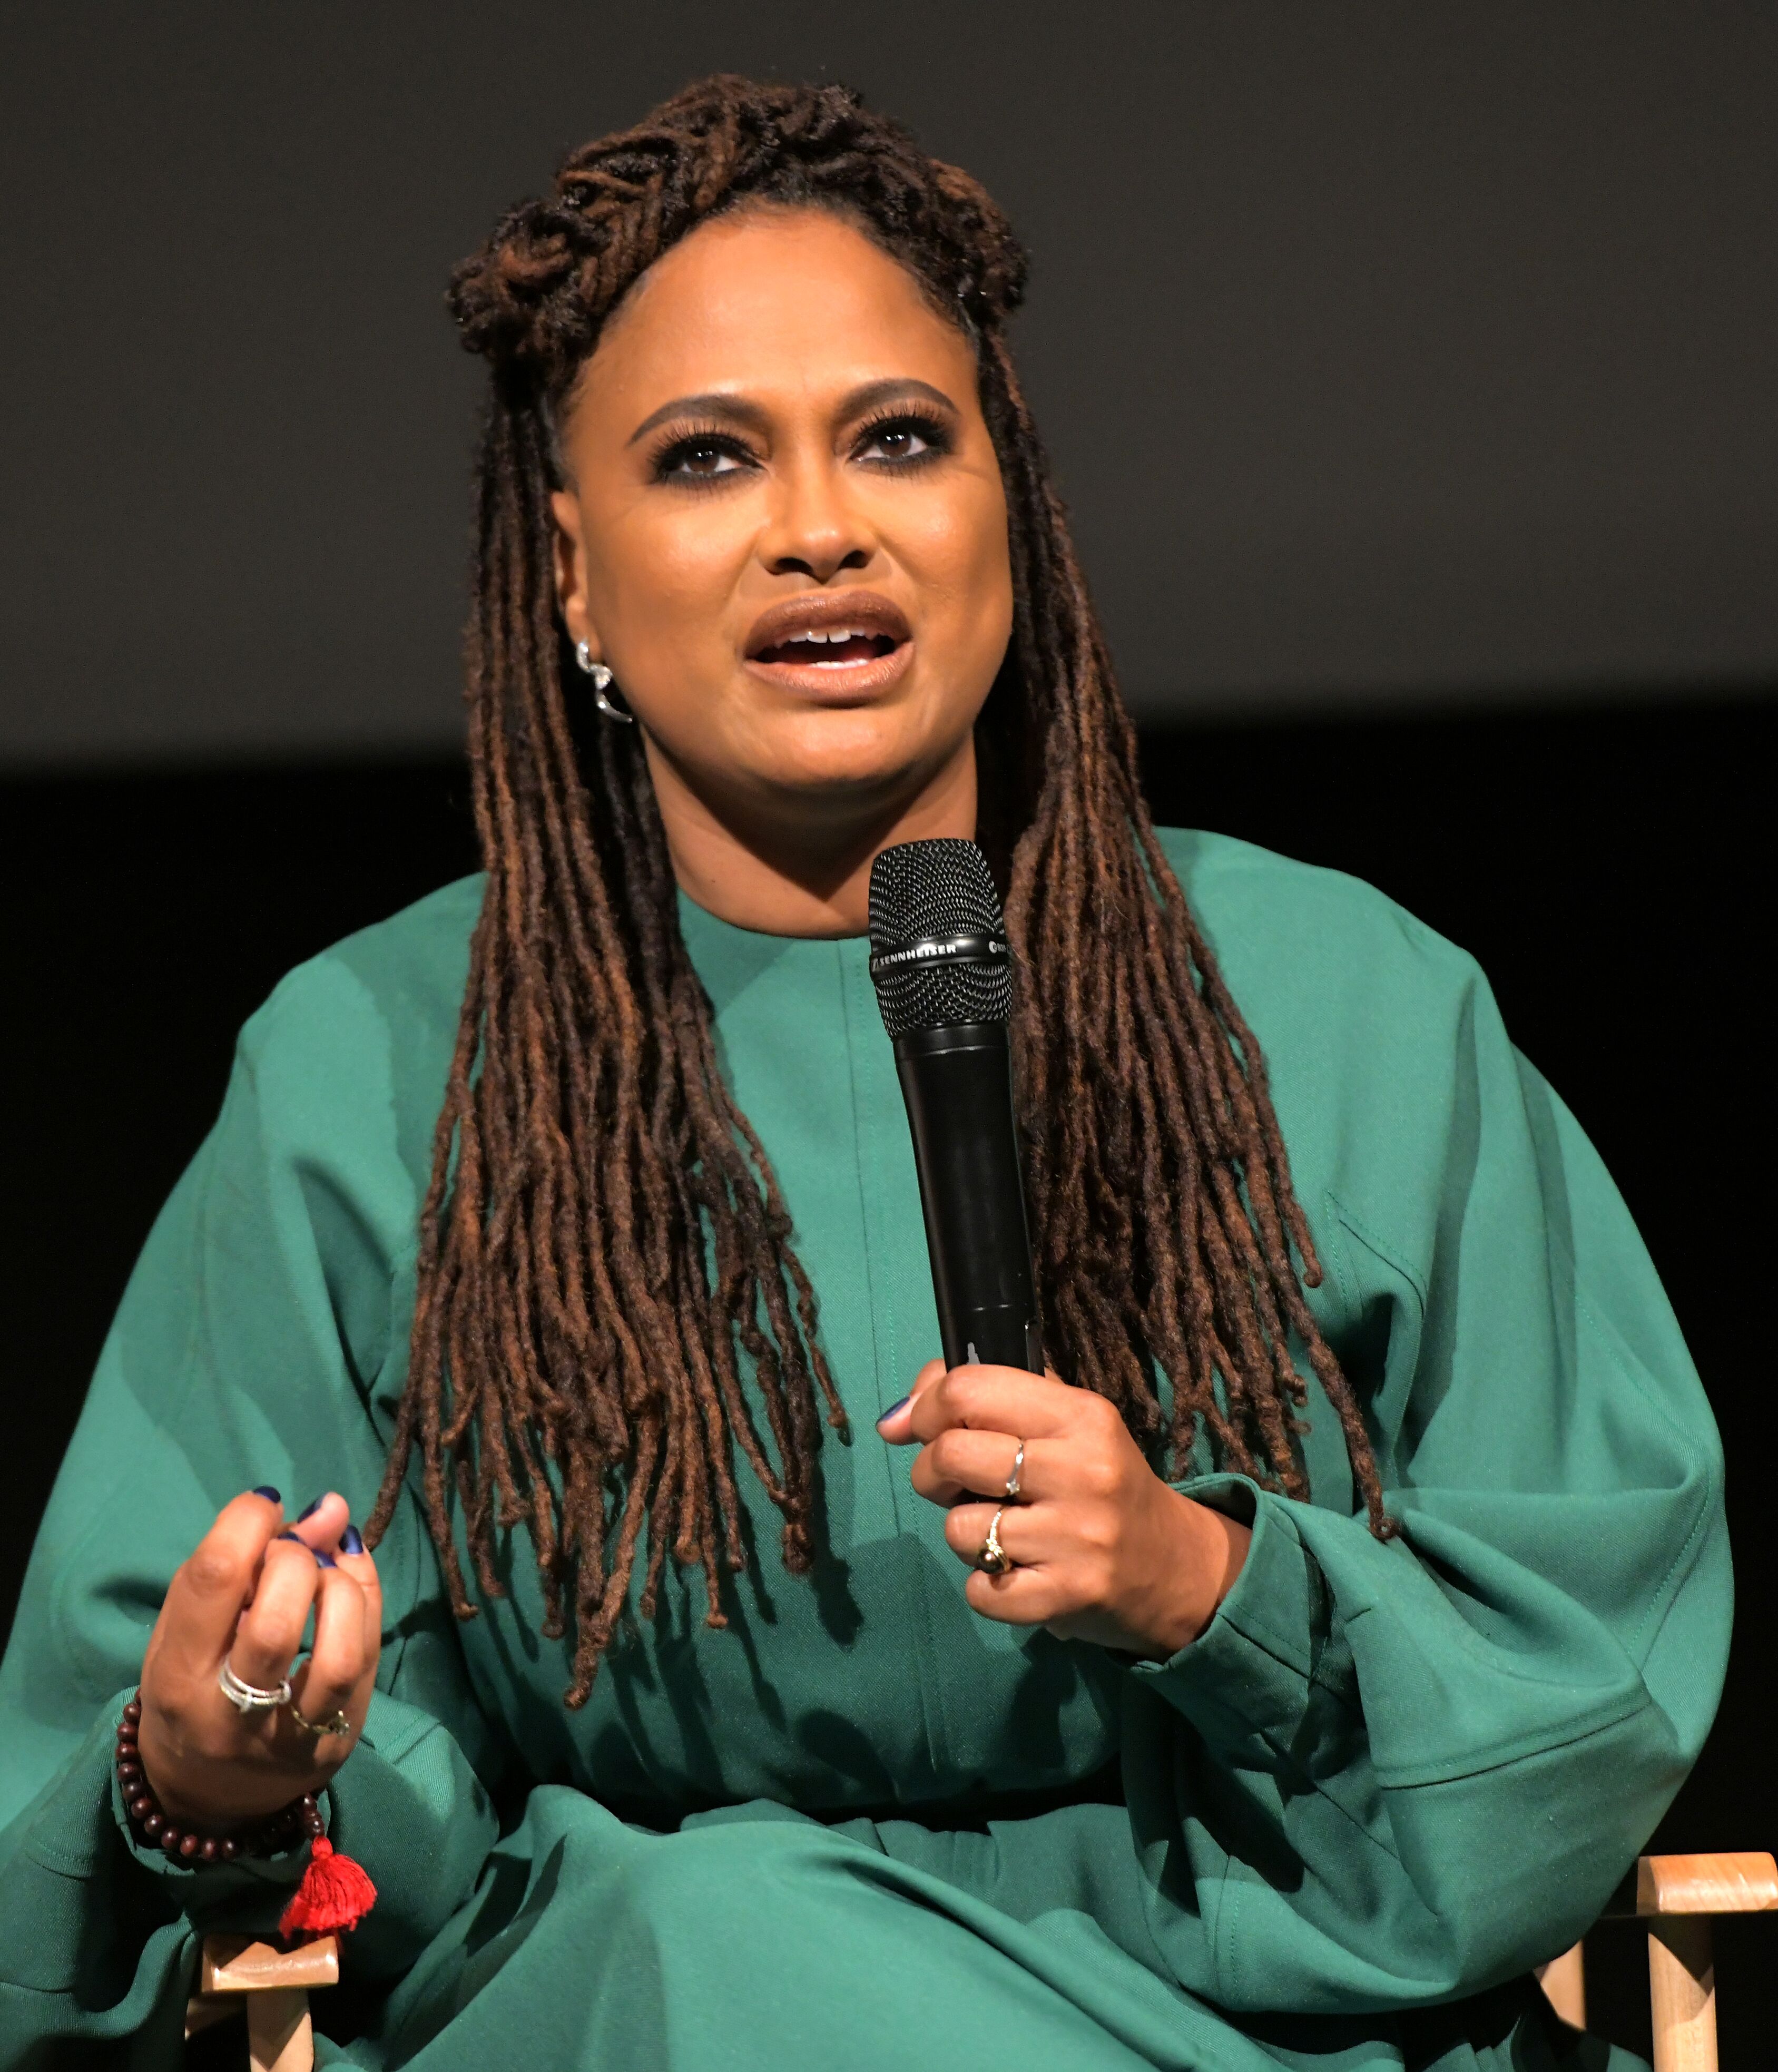 Ava DuVernay at Netflix's "When They See Us" Screening on August 11, 2019. | Source: Getty Images